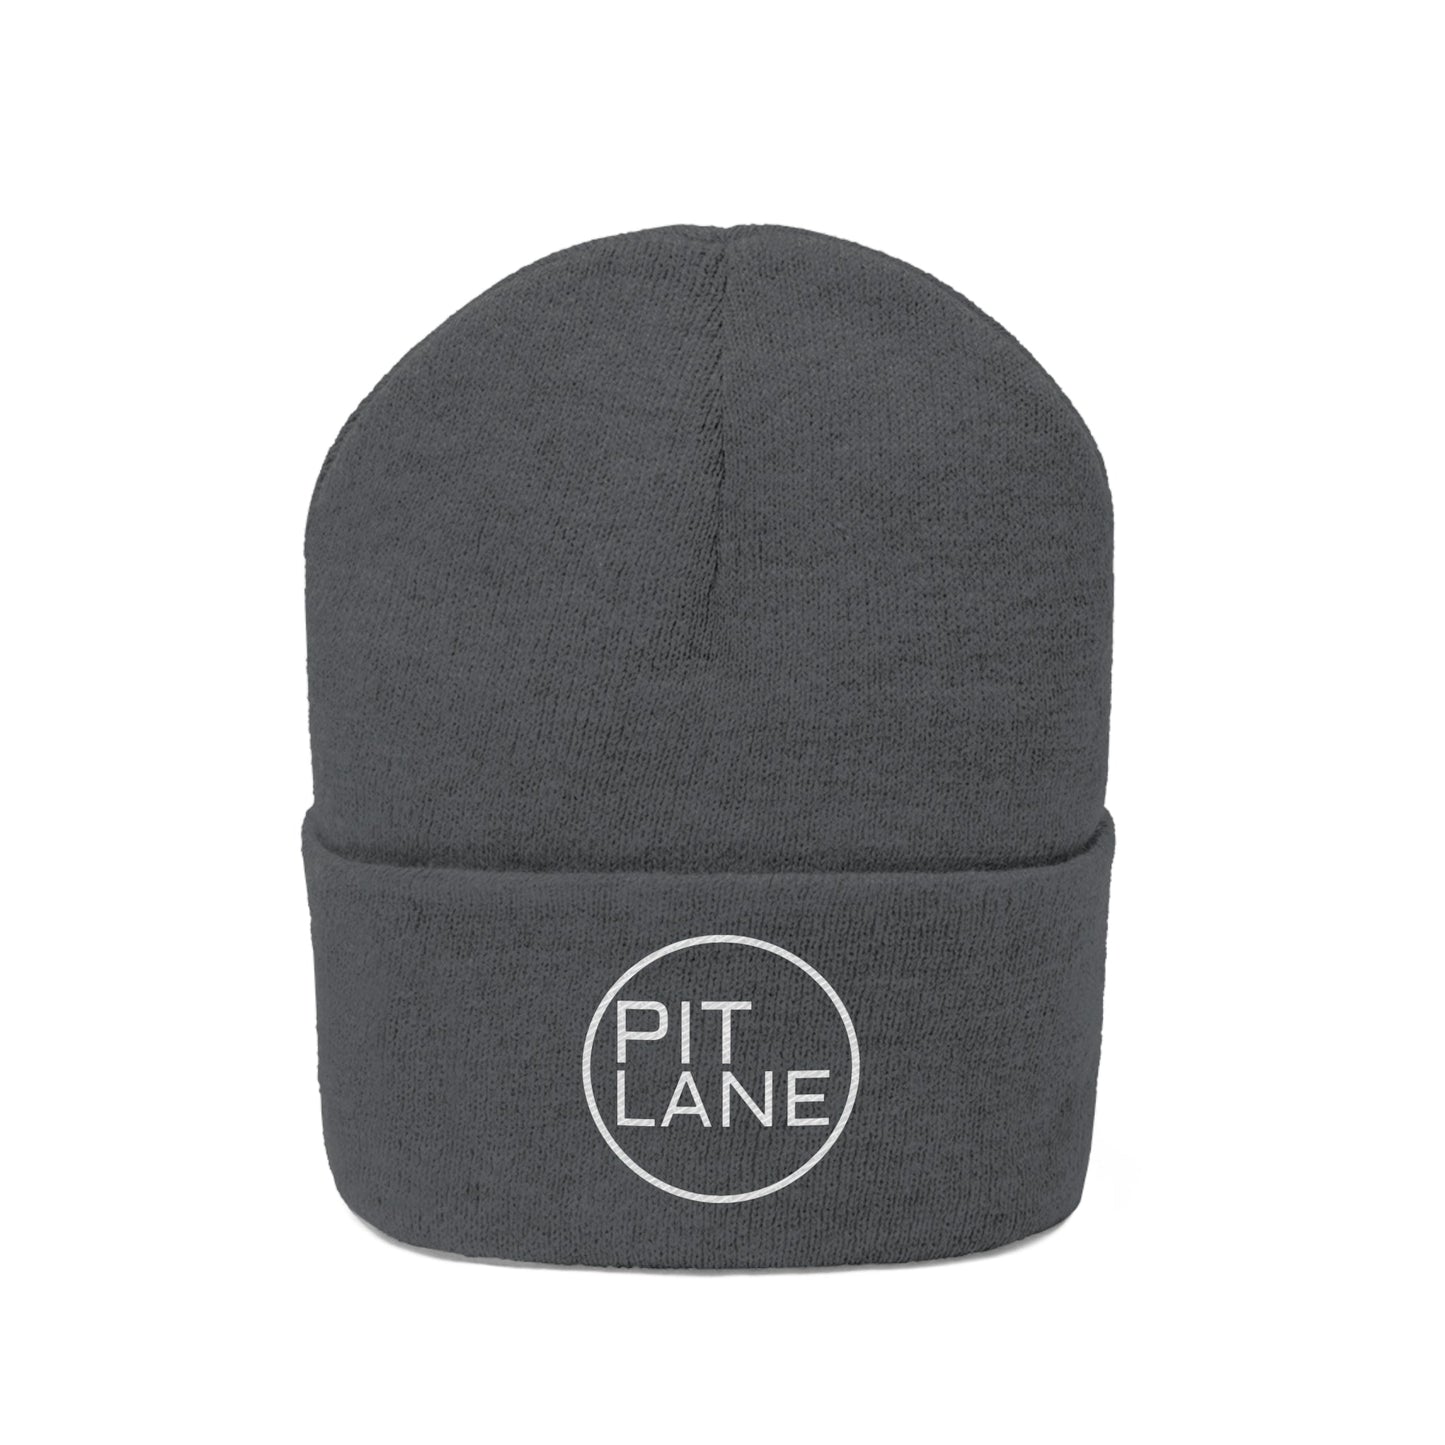 PIT LANE CLOTHING Knit Embroidered 100% Wool Knit Beanie